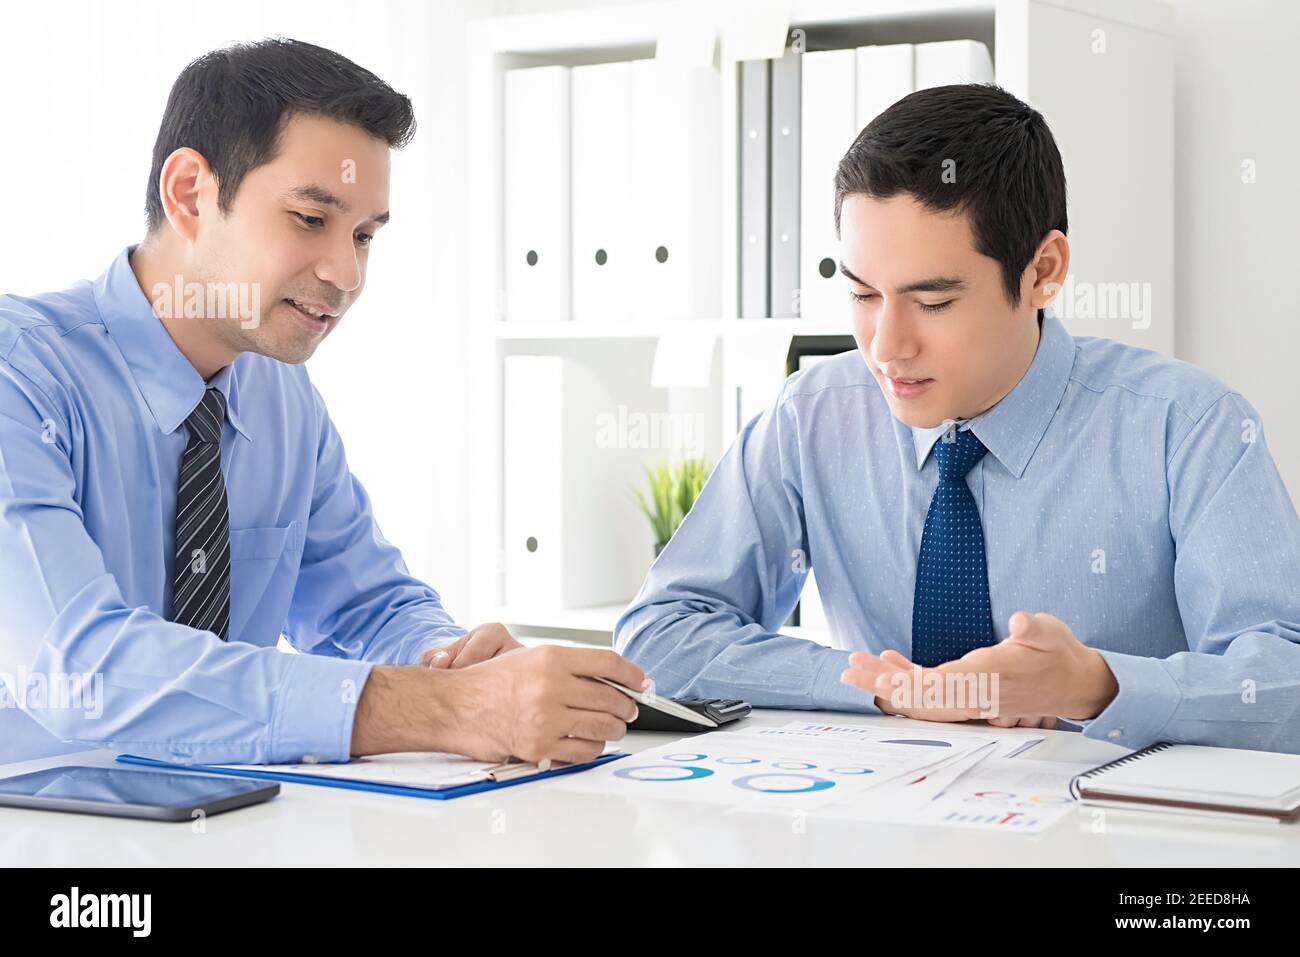 Asian businessmen analyzing and discussing work presentation documents at meeting table in the office Stock Photo